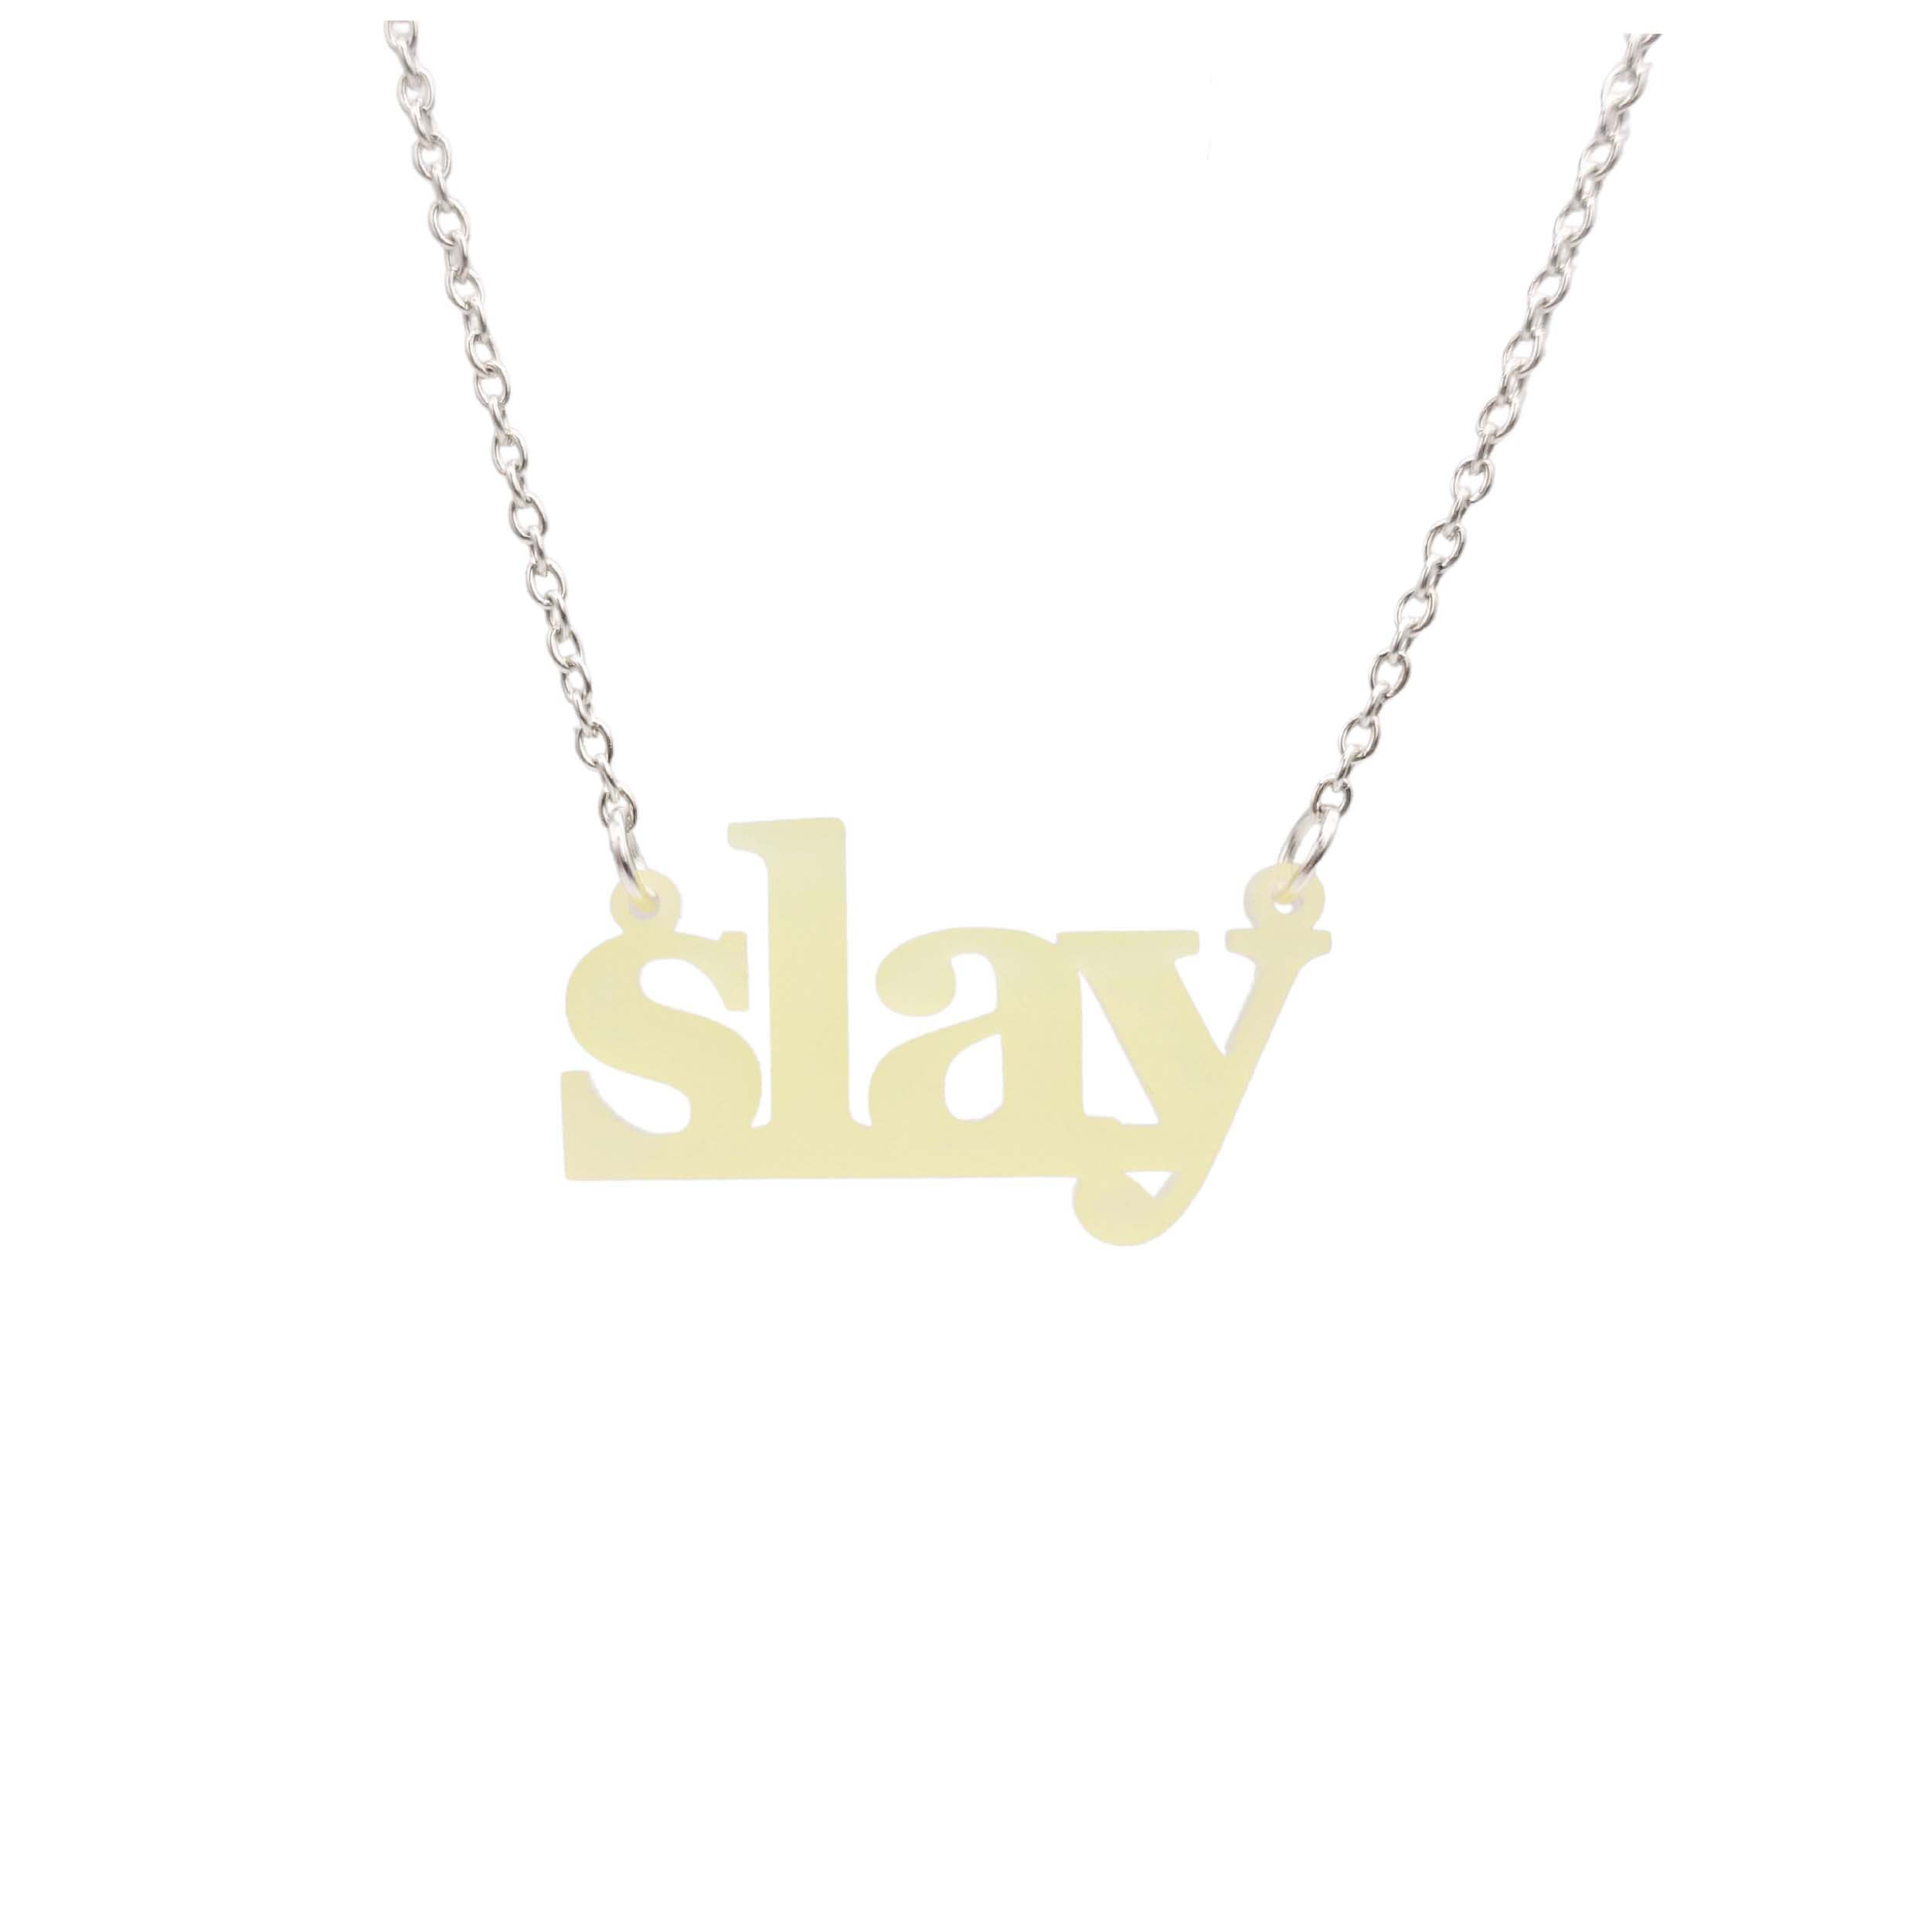 Slay necklace in uranium yellow on a silver chain shown hanging against a white background. Designed by Sarah Day for Wear and Resist. £2 goes to Women for Refugee Women charity. 